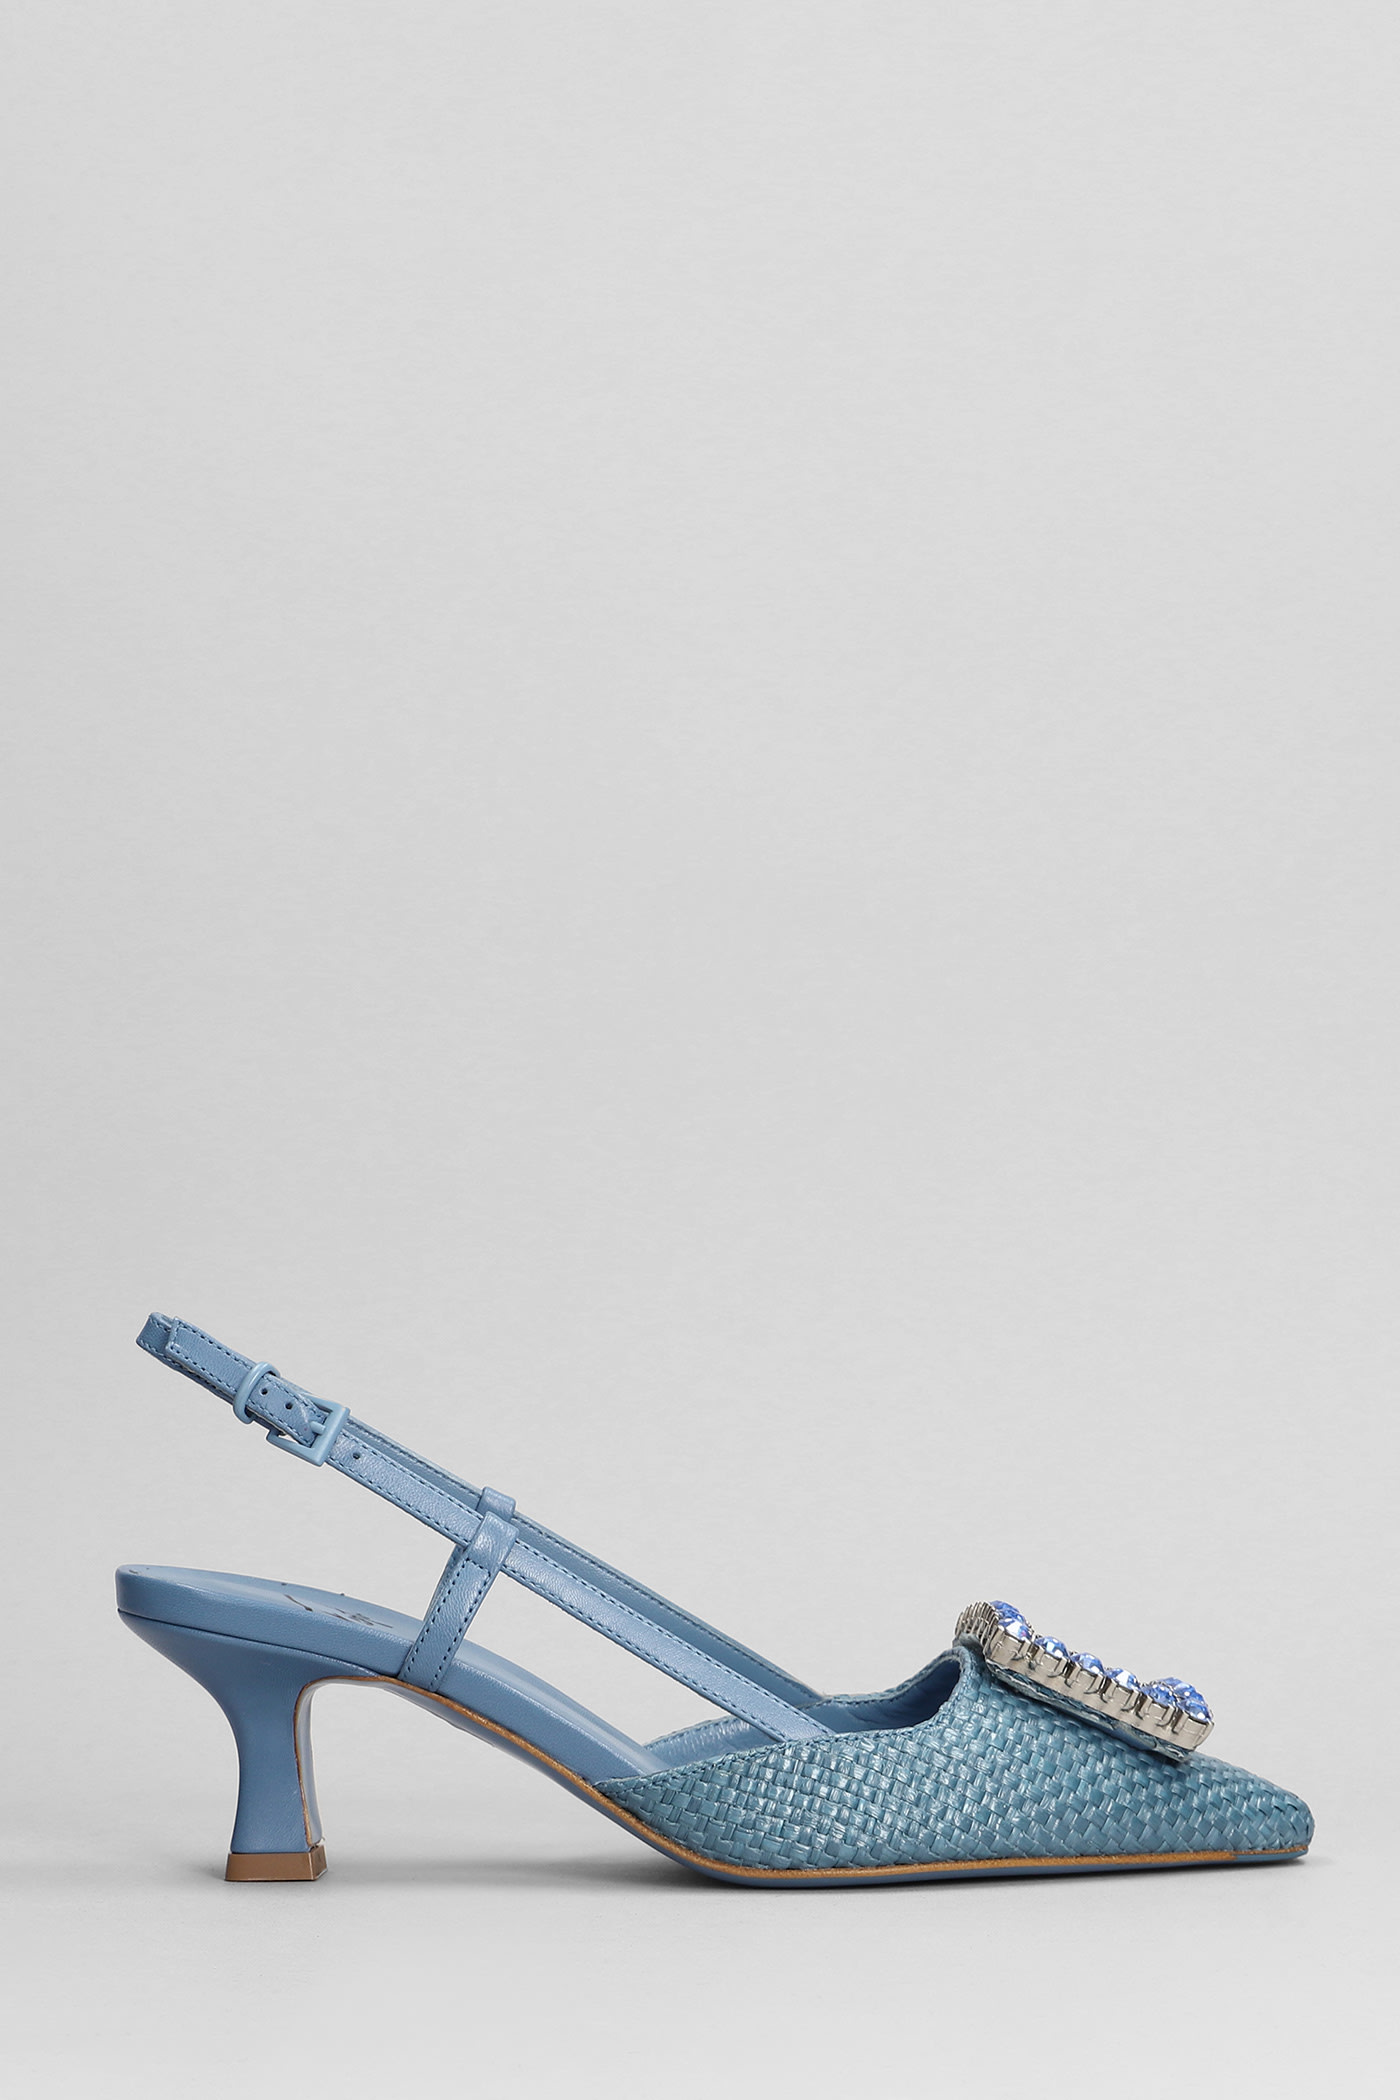 Stefi Pumps In Blue Leather And Fabric